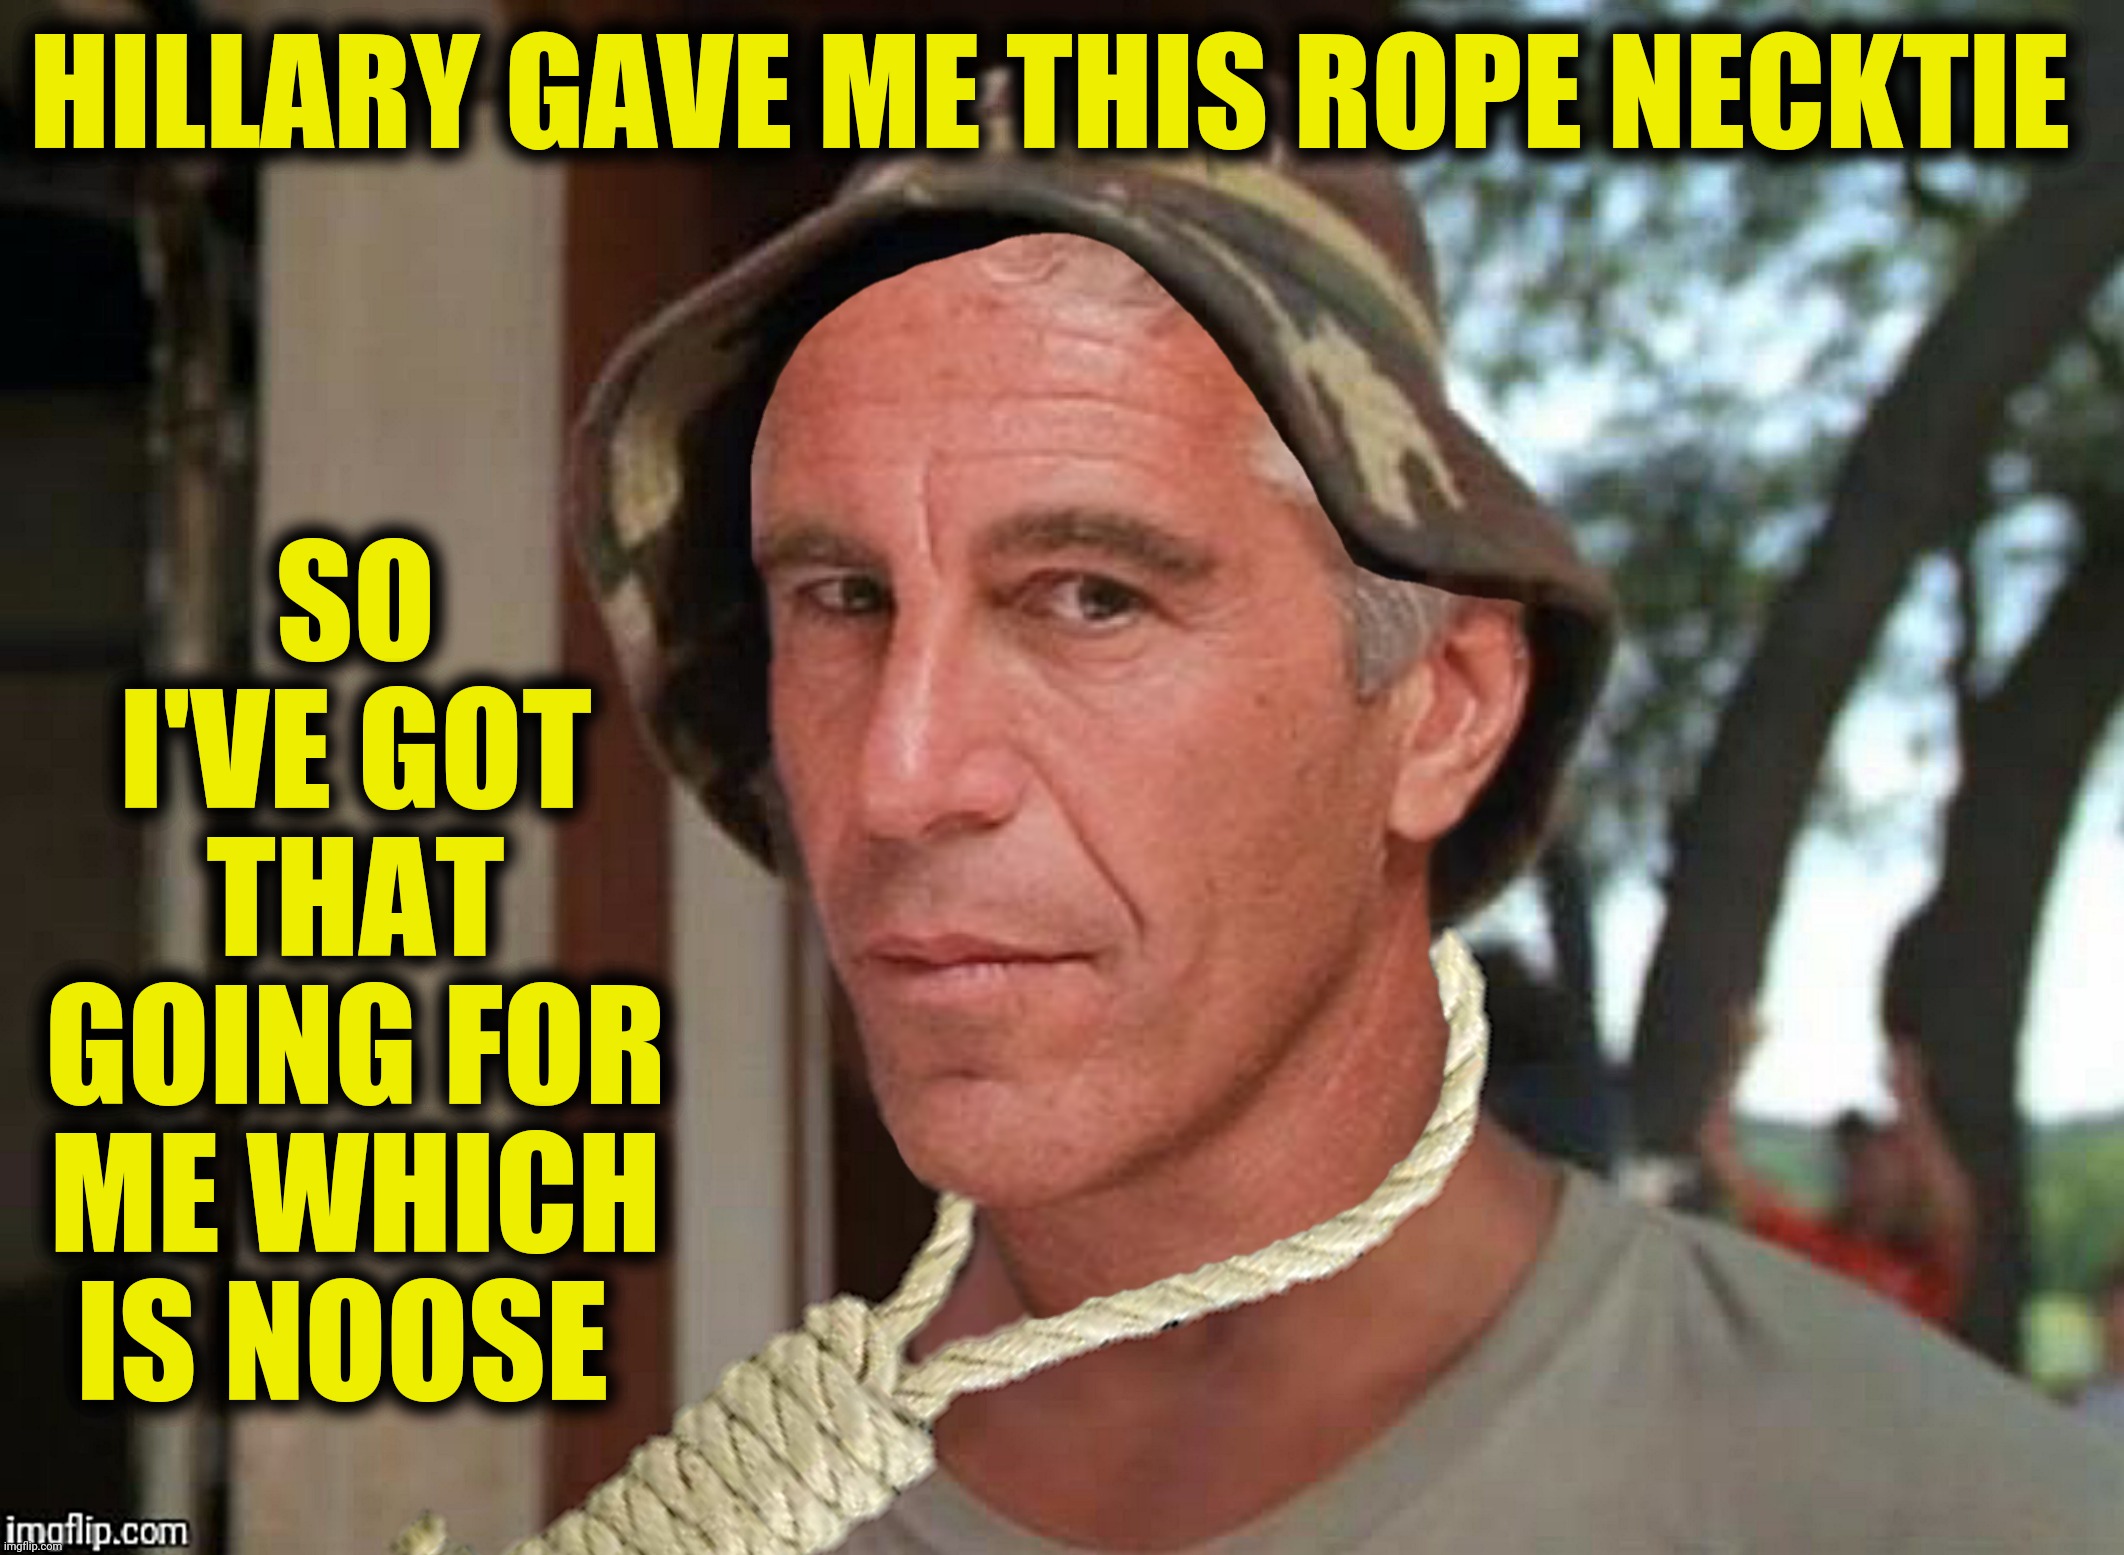 HILLARY GAVE ME THIS ROPE NECKTIE SO I'VE GOT THAT GOING FOR ME WHICH IS NOOSE | made w/ Imgflip meme maker